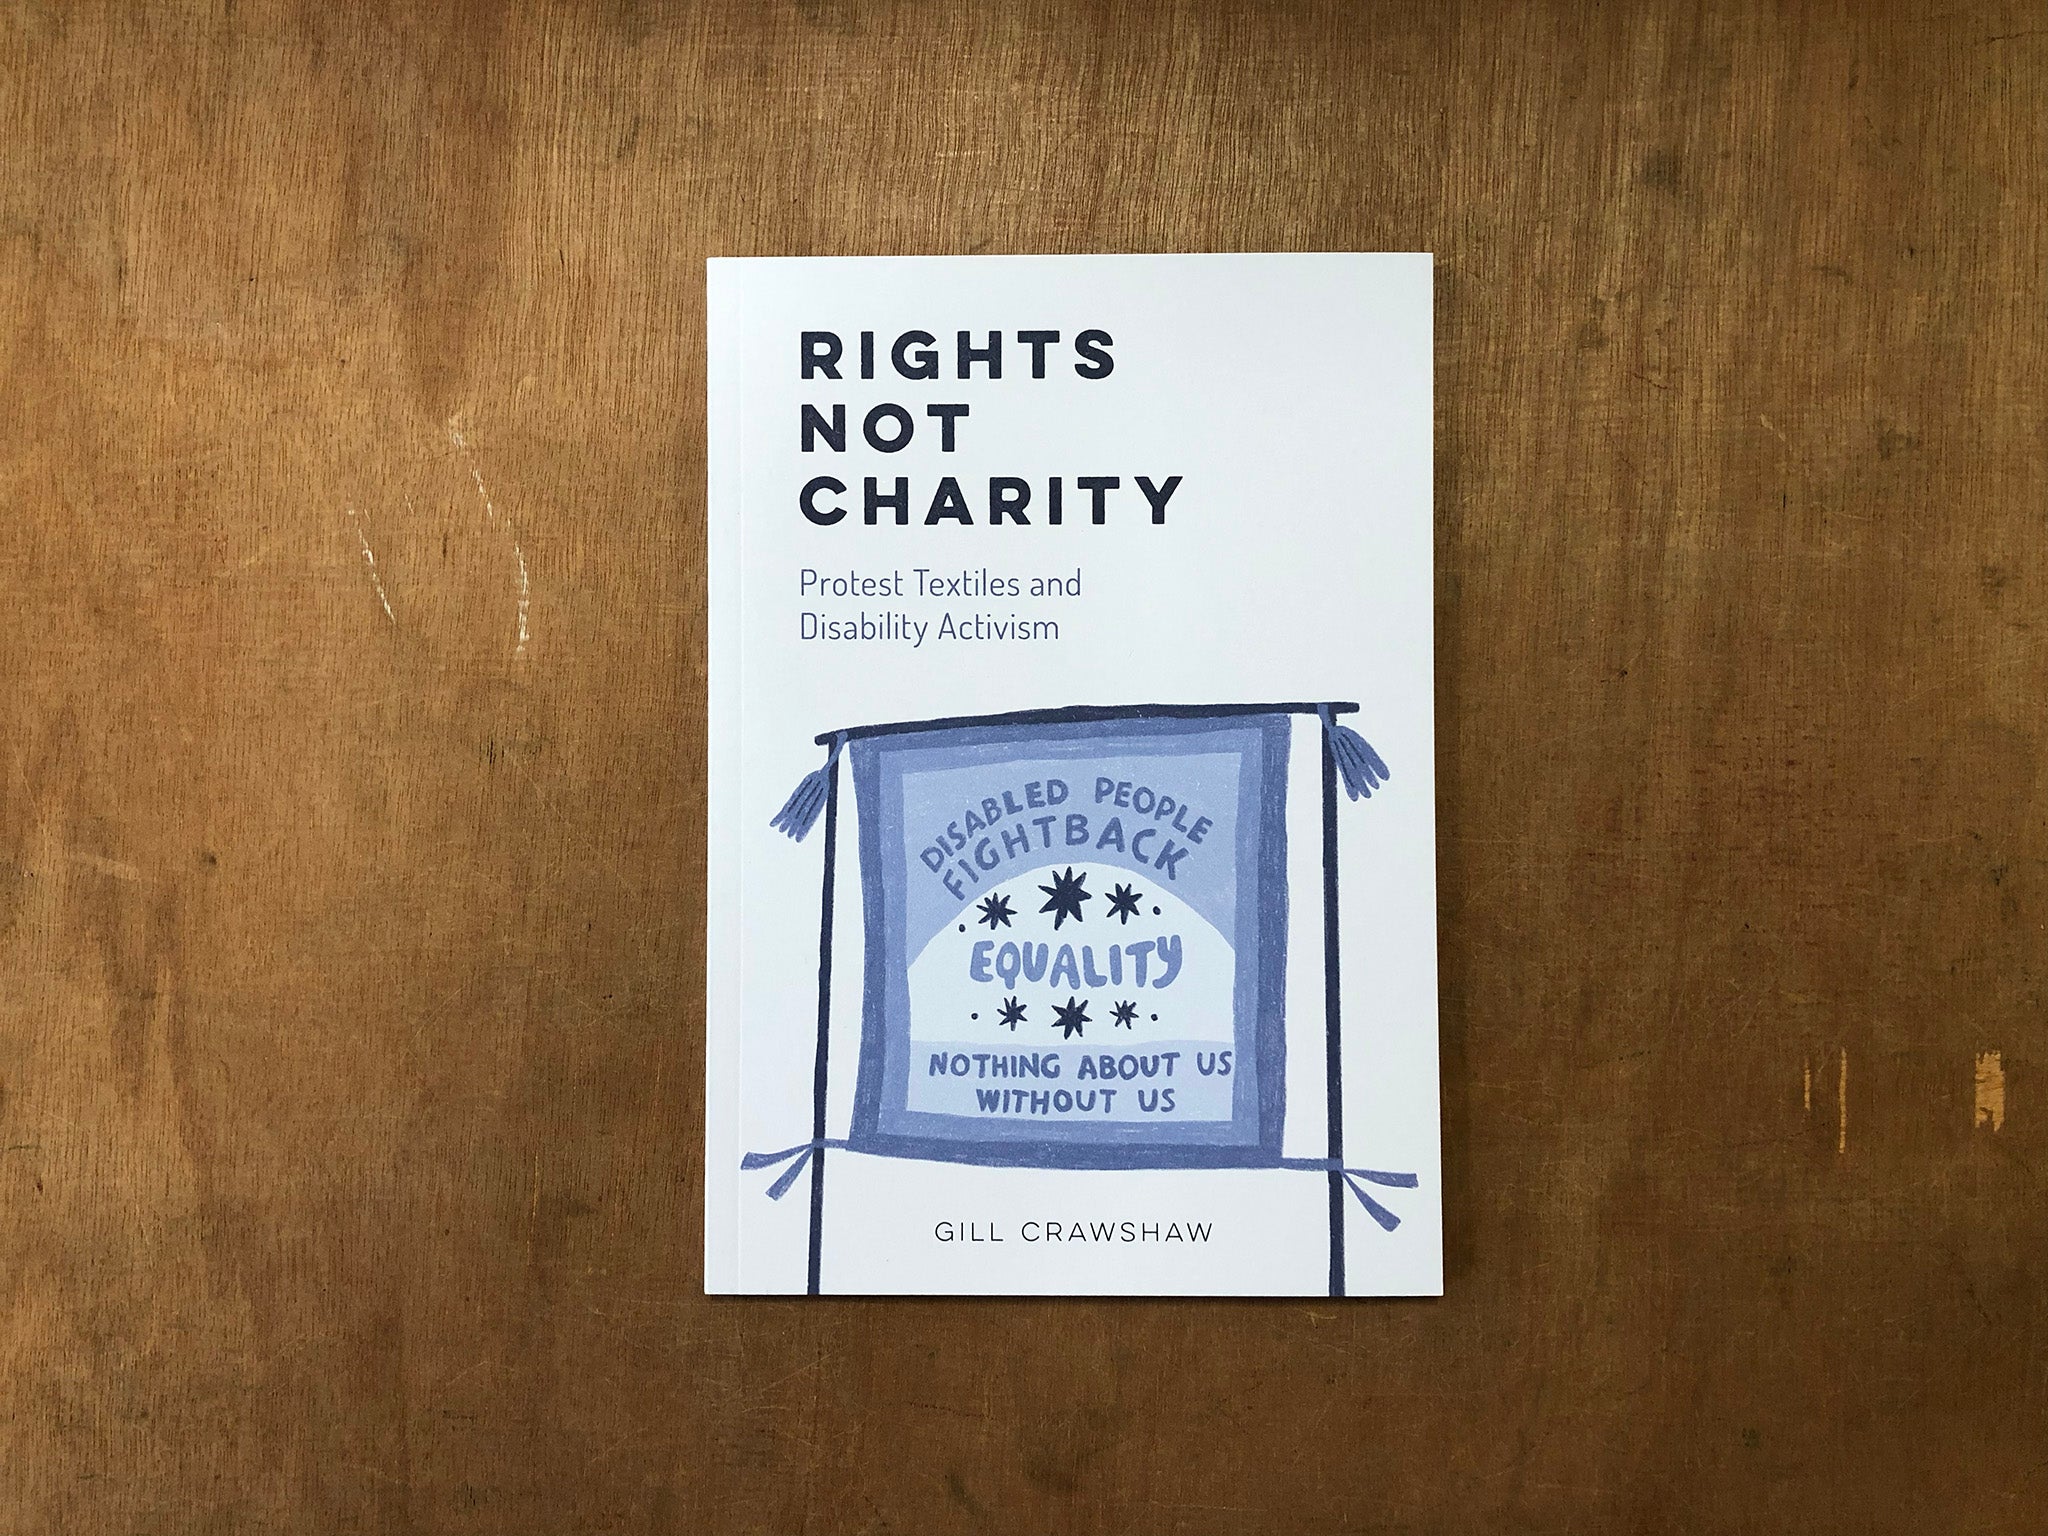 RIGHTS NOT CHARITY: PROTEST TEXTILES AND DISABILITY ACTIVISM by Gill Crawshaw